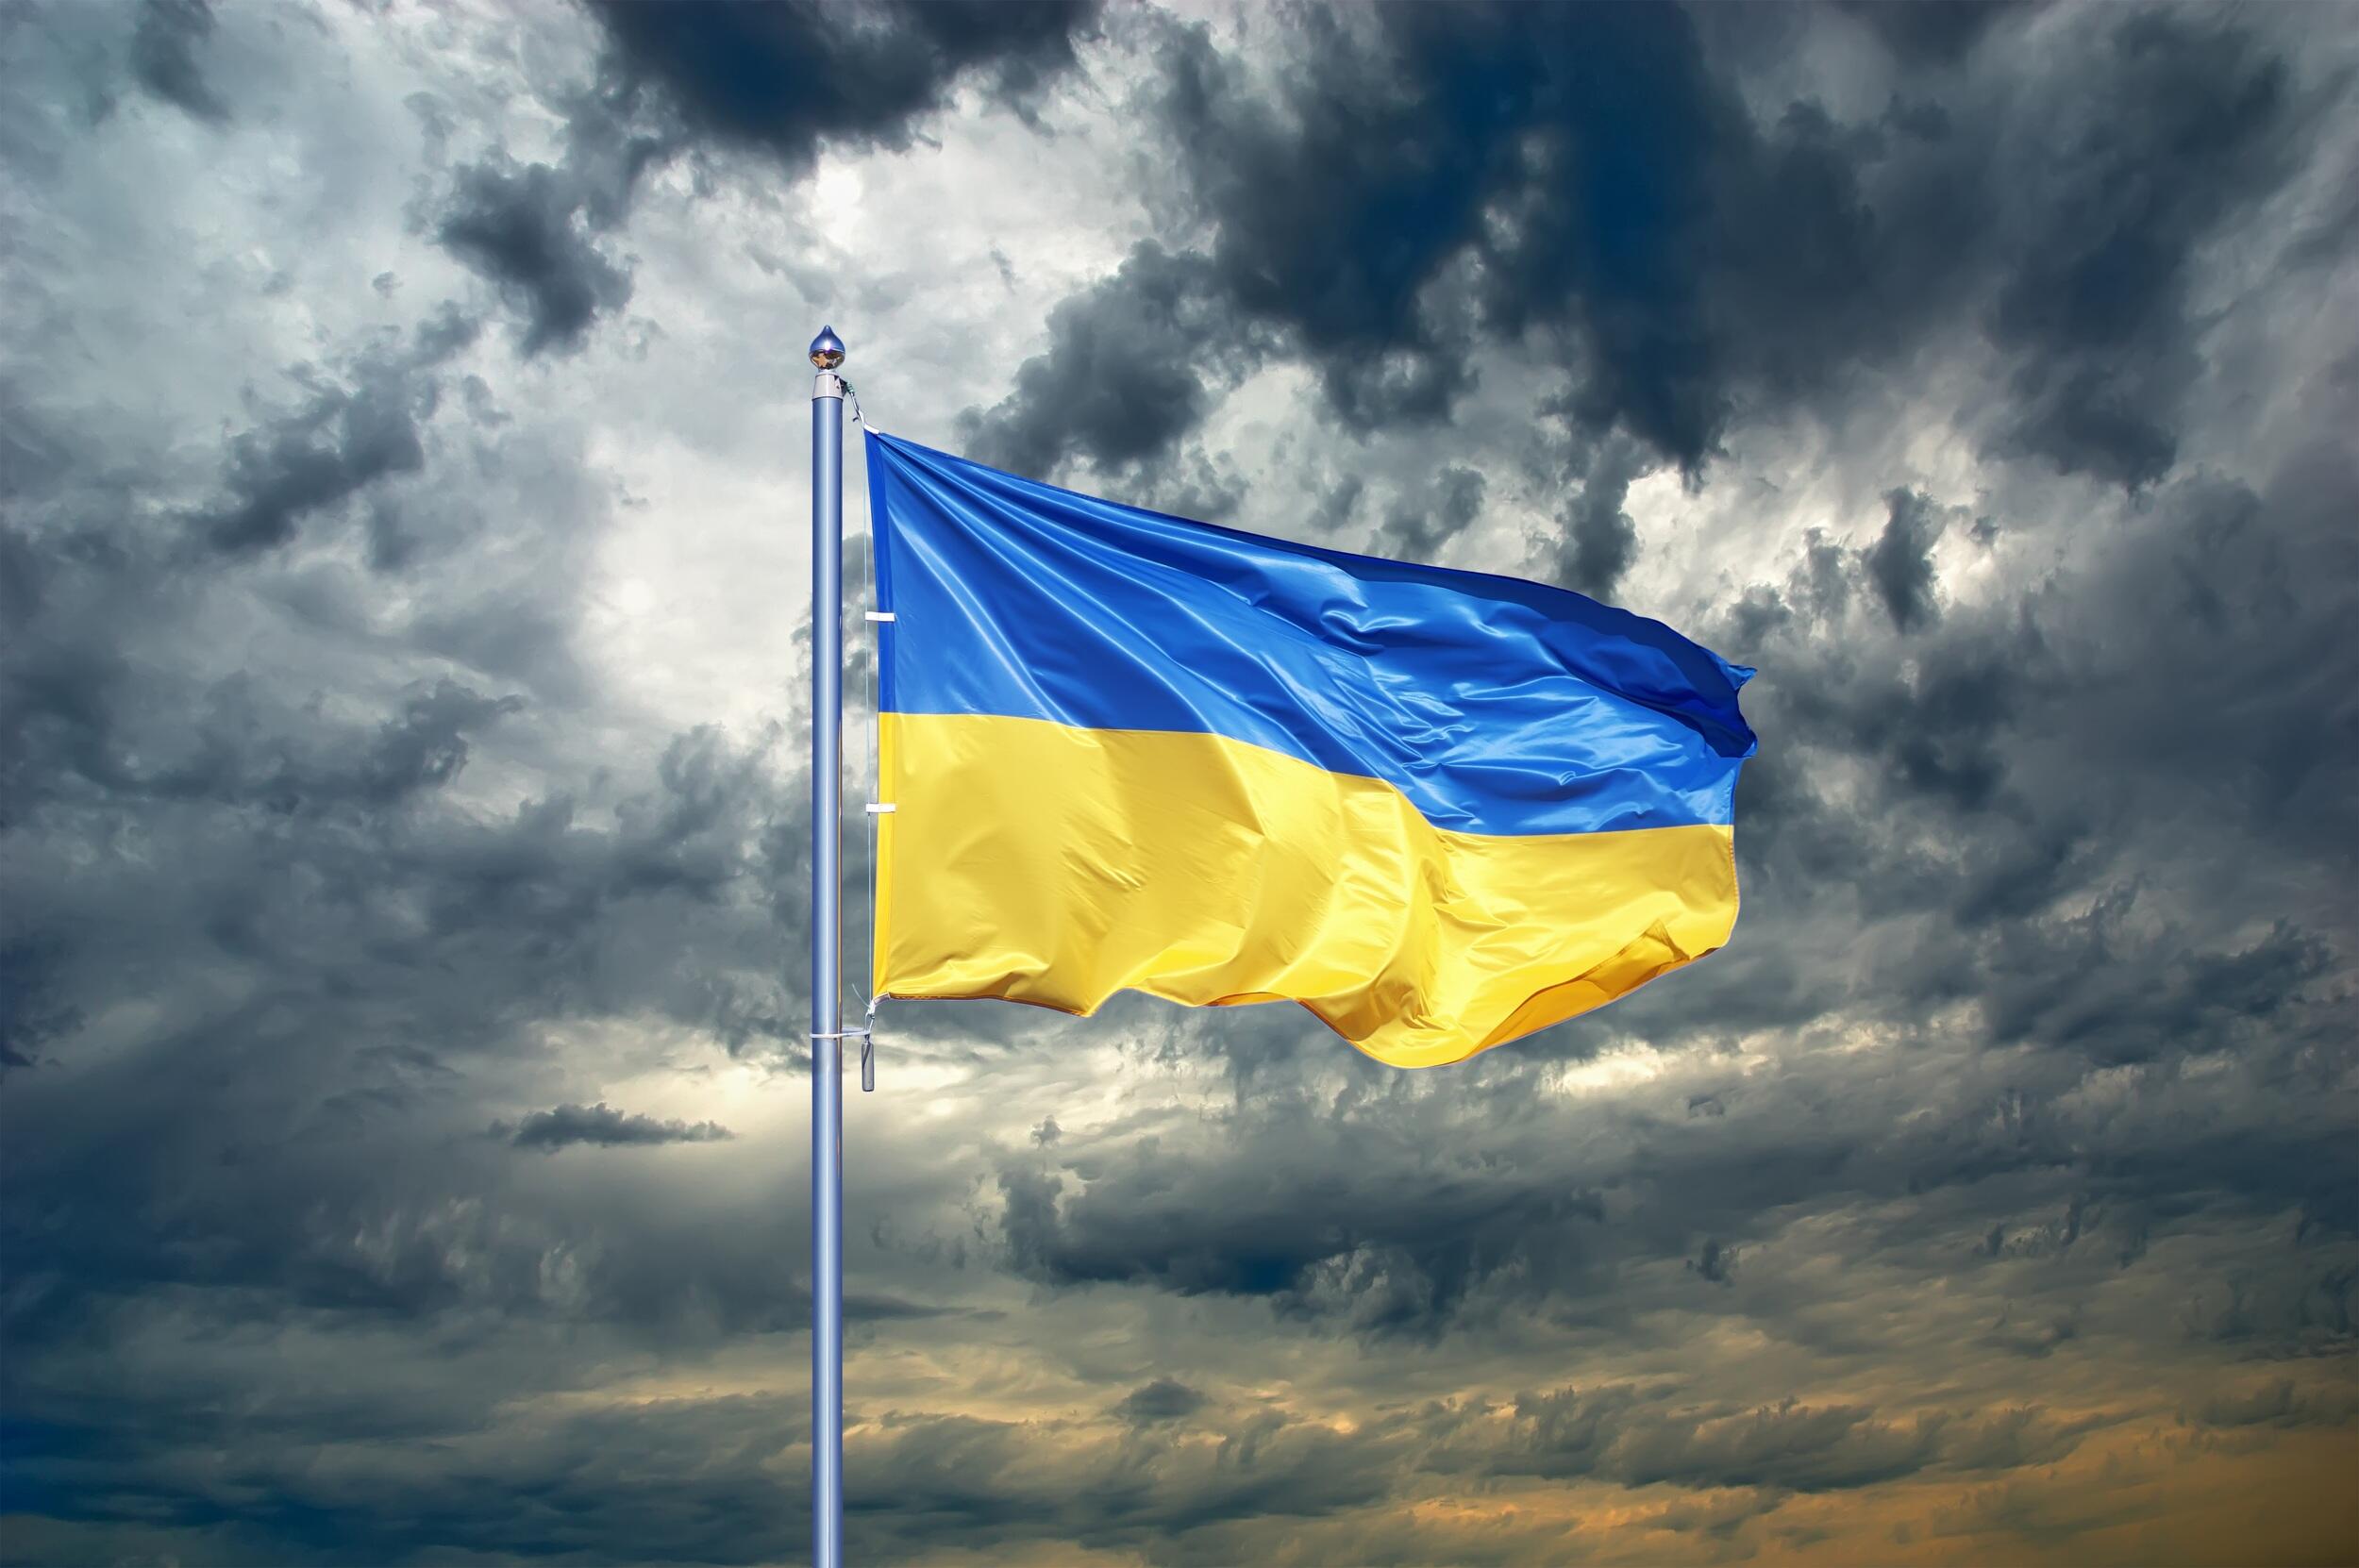 The Ukrainian flag being blown by wind in front of a cloudy sky